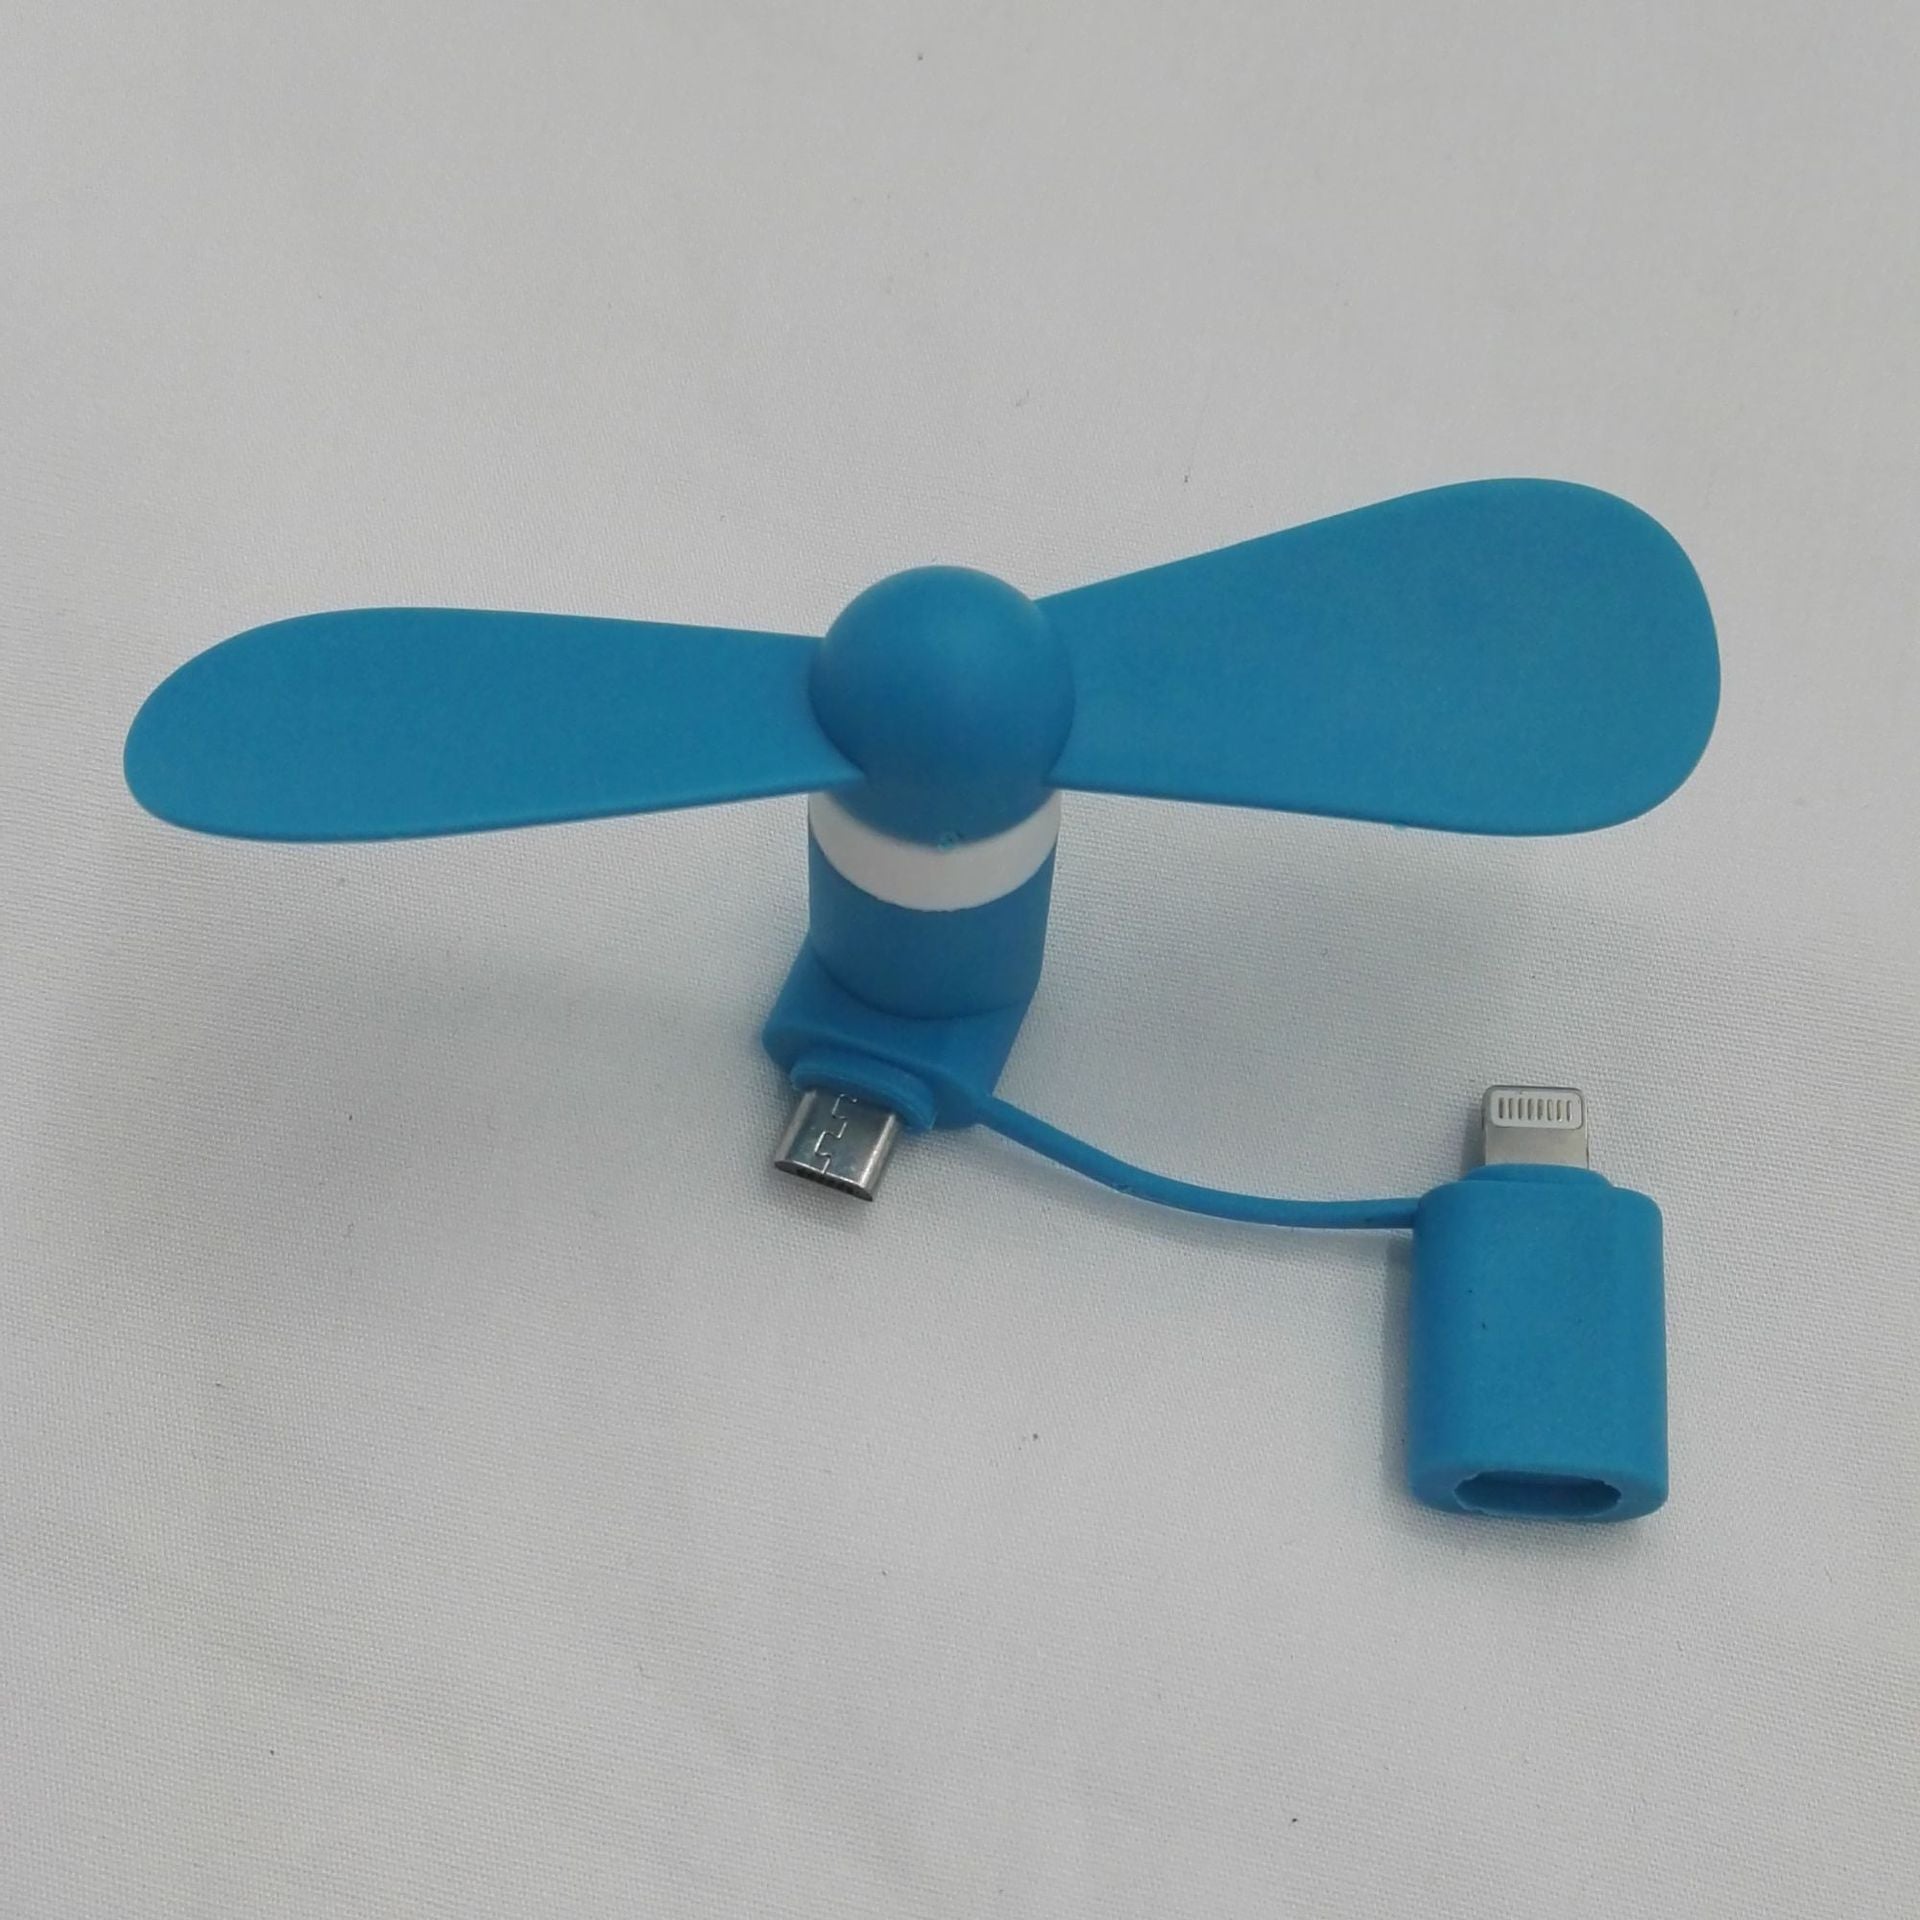 2 IN 1 Travel Portable CellPhone Mini Fan Cooling Cooler For Micro USB For iPhone 5 5S SE 6 6S Plus 8 Pin Android Phones S6 S7 - ebowsos